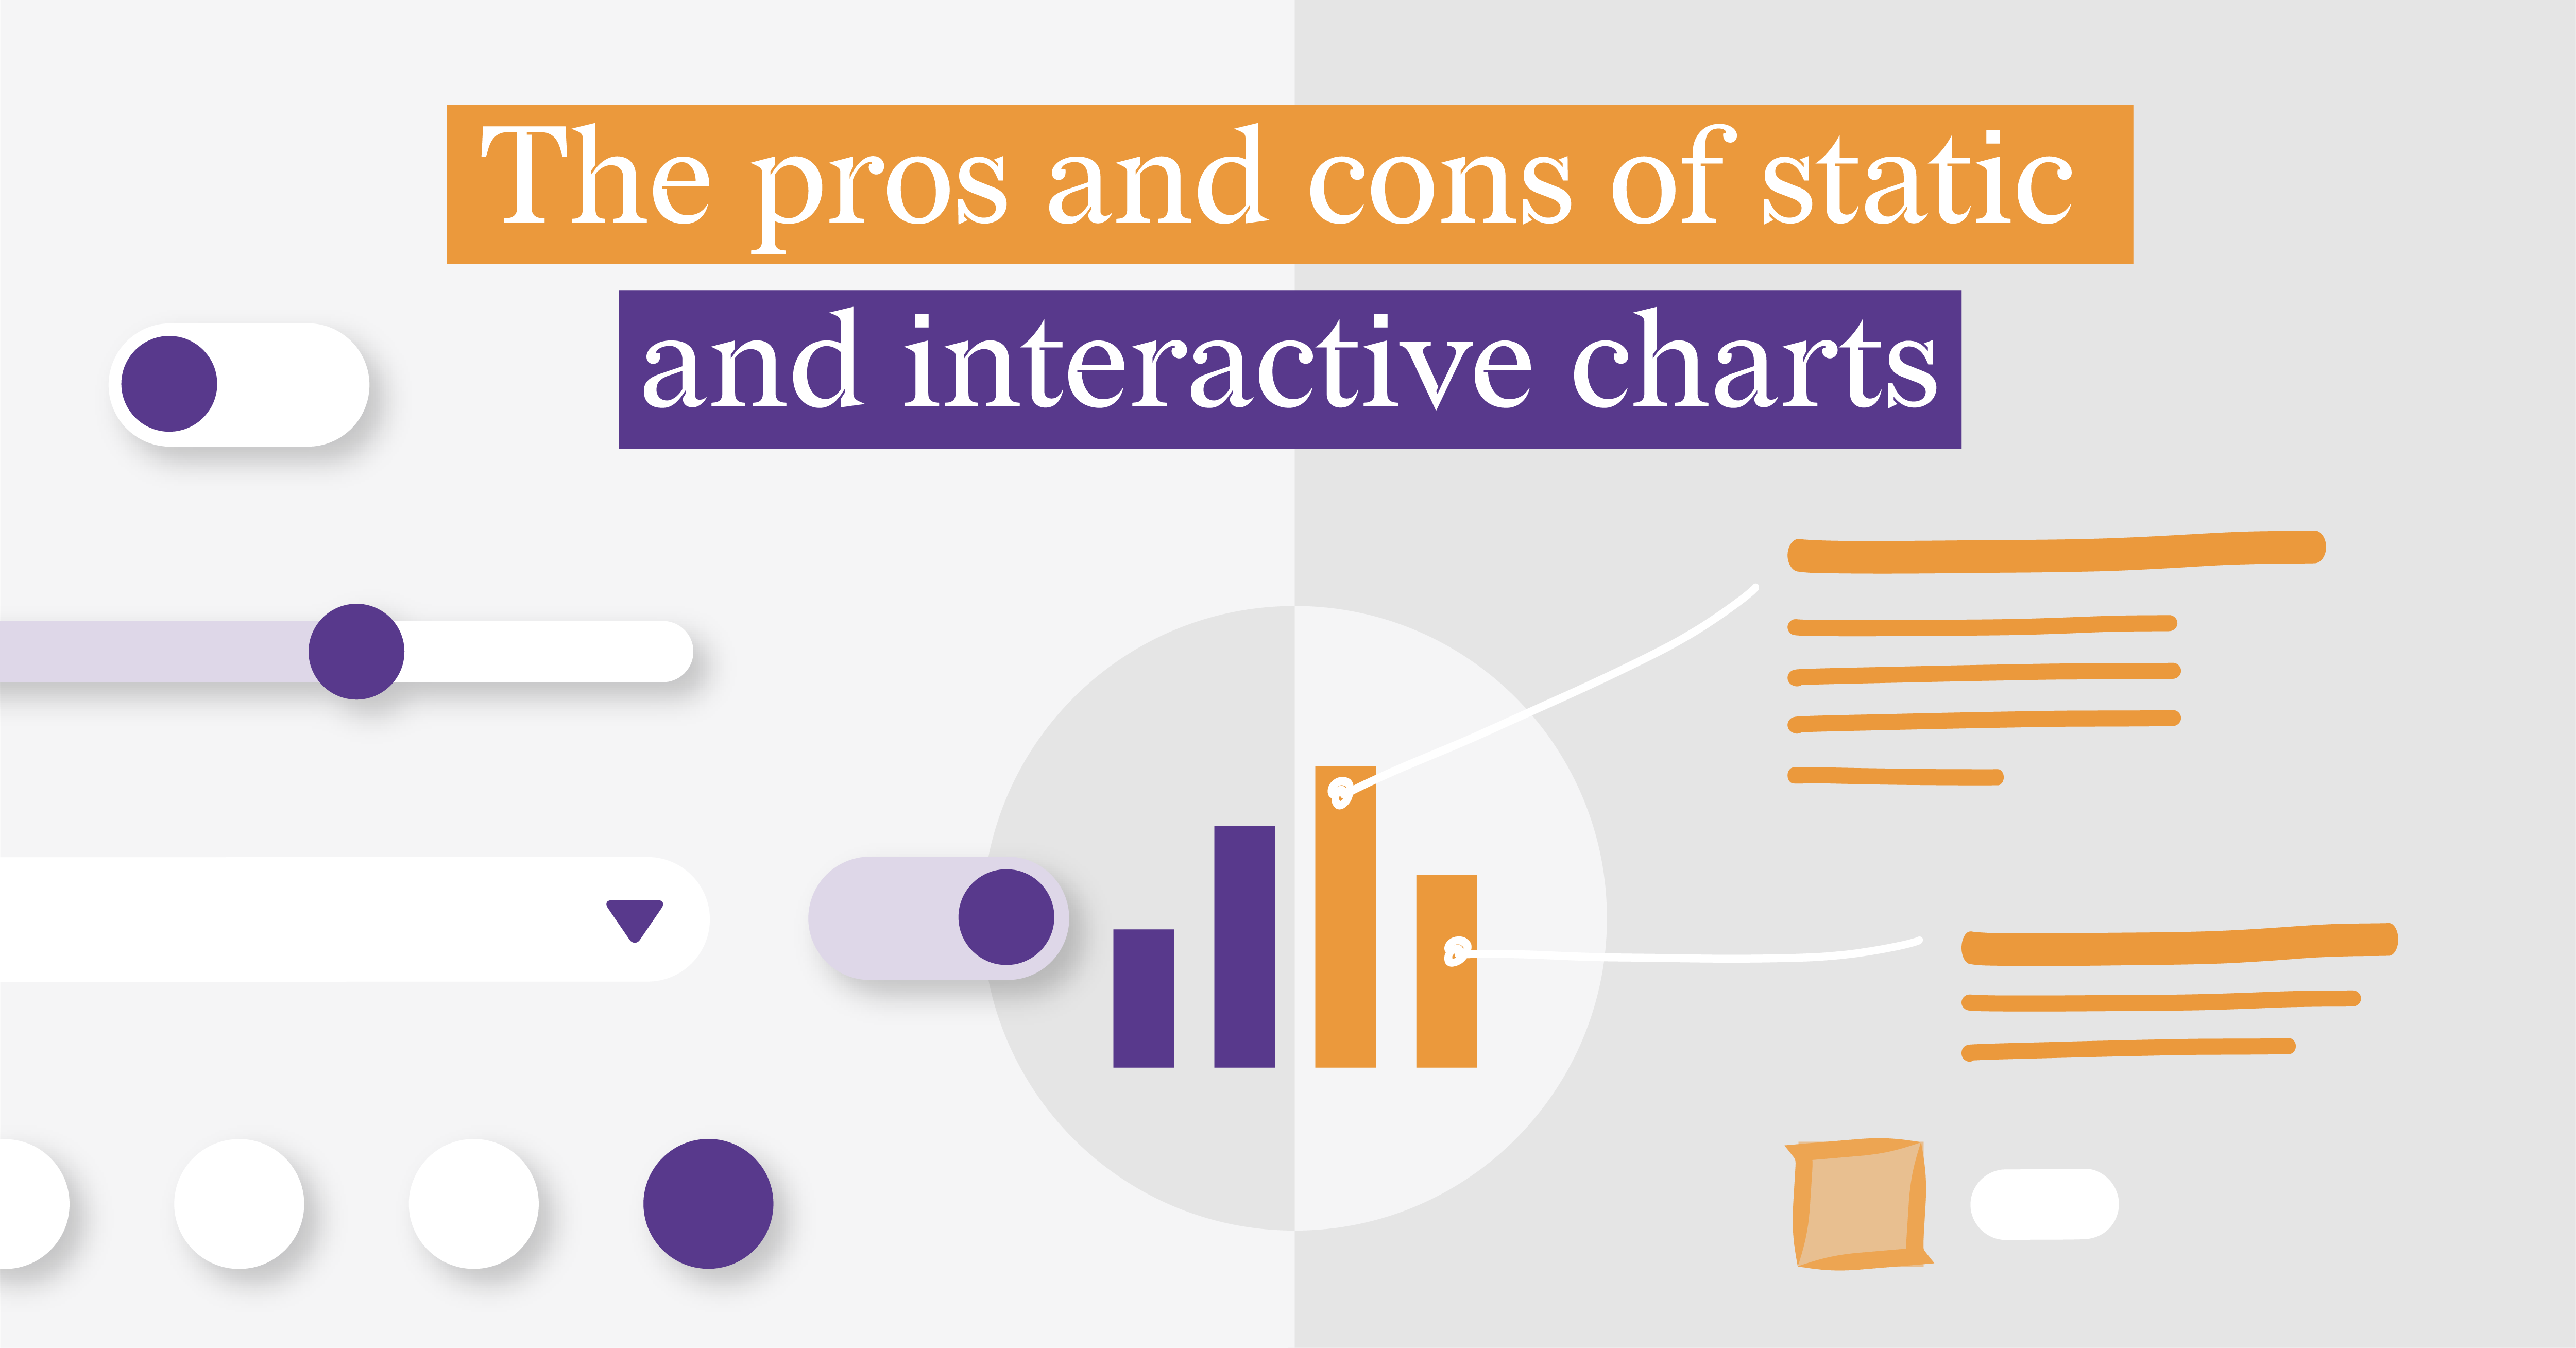 The featured image reads "The pros and cons of static and interactive charts".